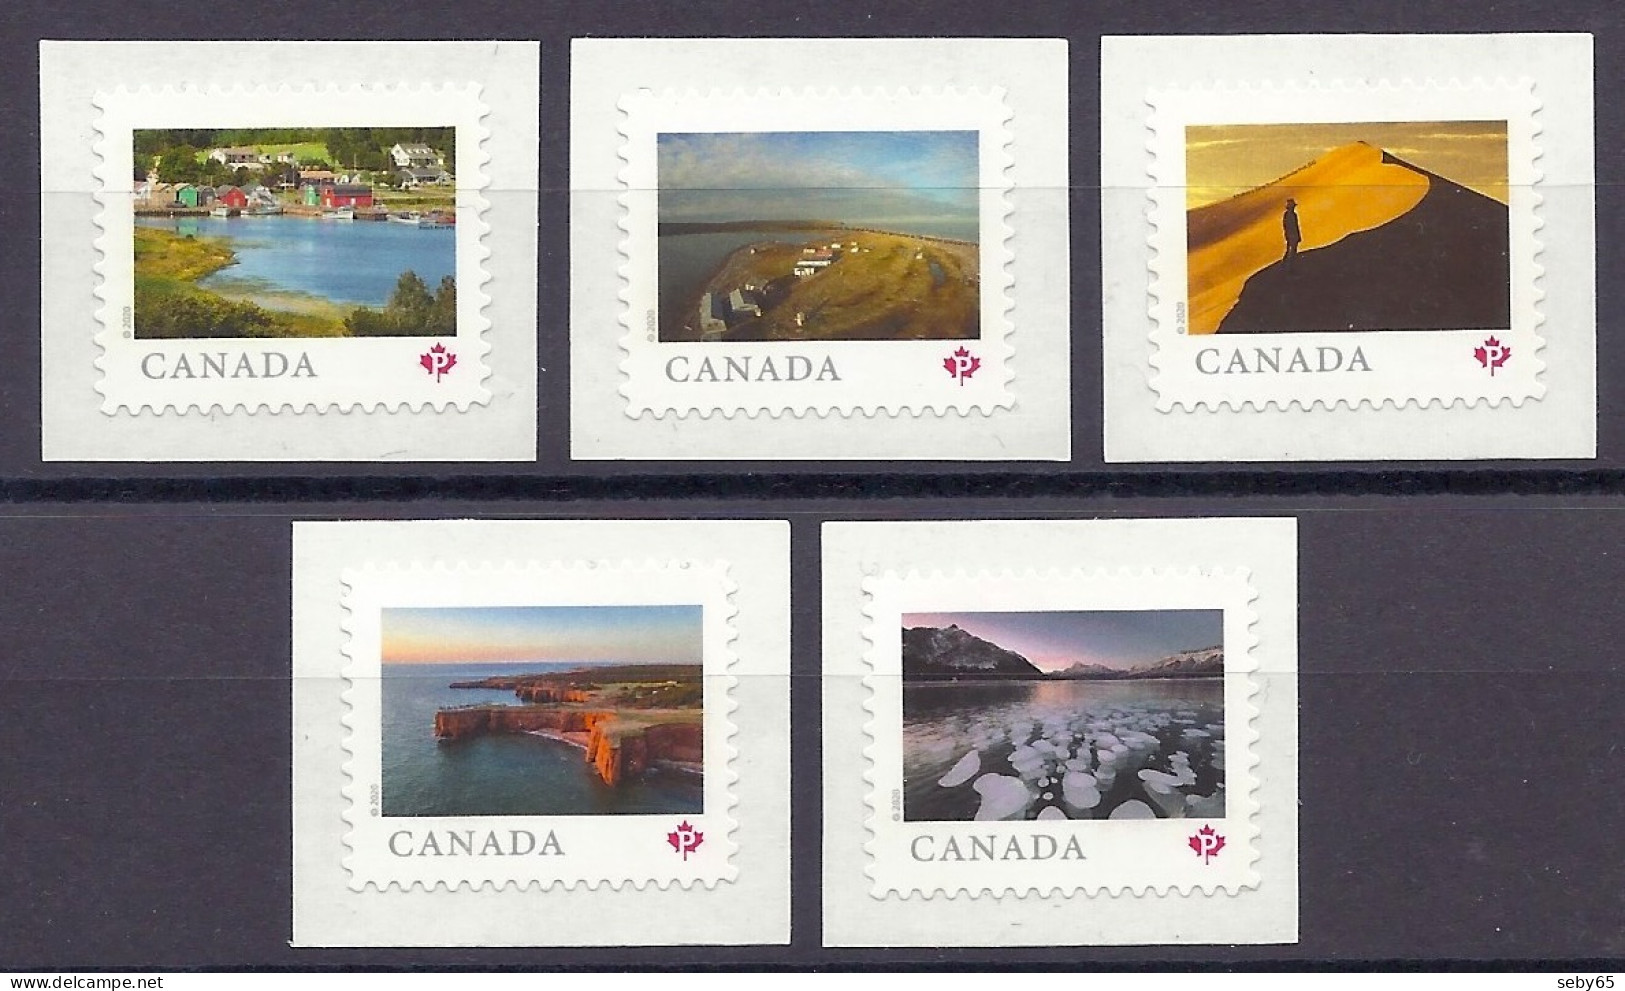 Canada 2020 - From Far And Wide, Scenic Views, Scenery Landscapes, Paysages, National Parks, Parc, Mountains - MNH - Ongebruikt